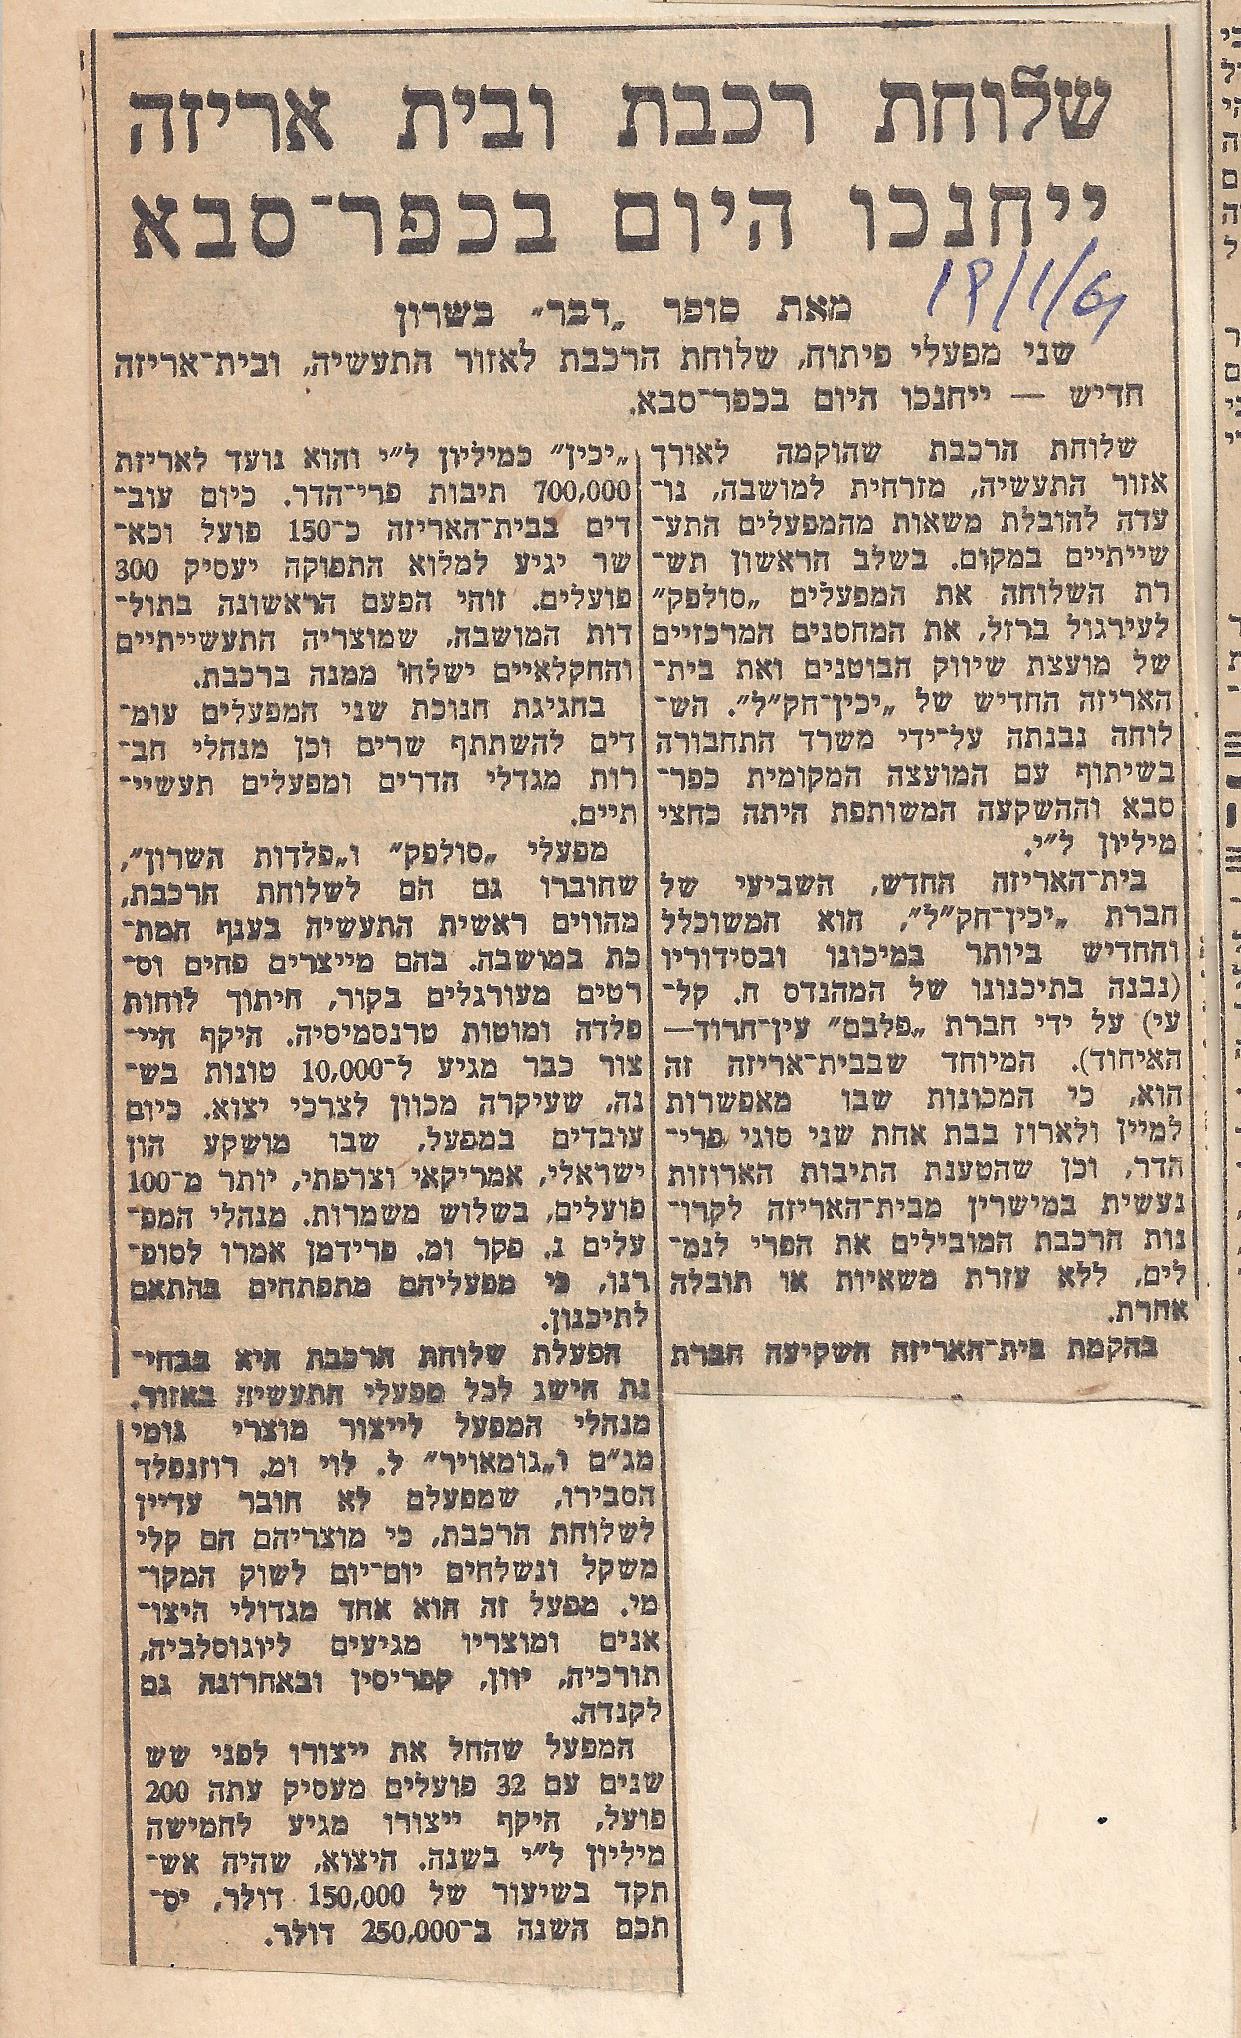 Photo of Davar newspaper article 19/01/1961